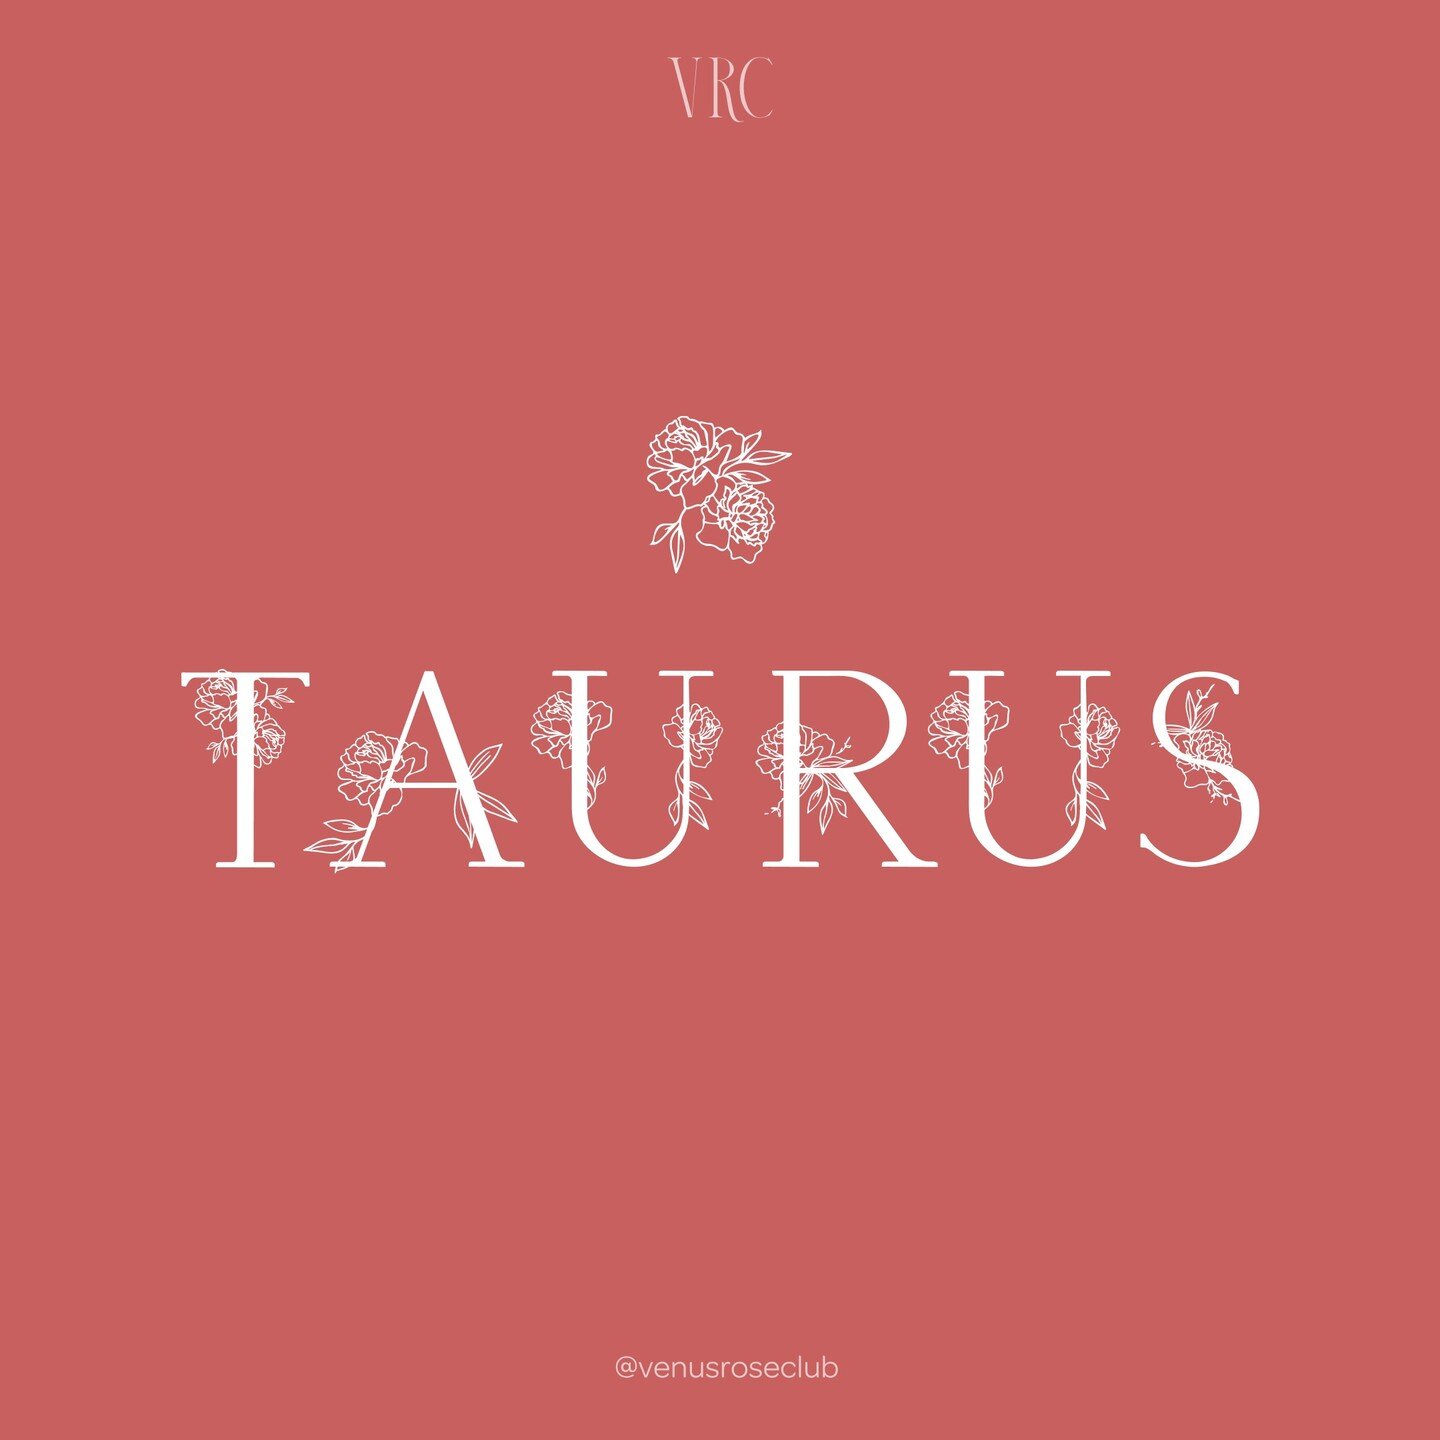 💐 Celebrating Jupiter in Taurus with The Rosarium 🏵️ 

Like laying in a springtime garden full of fragrant, radiant roses and birdsong,  we invite you to step into The Rosarium.

Lorna and I shared a little taster of this last week.

Each Sun seaso